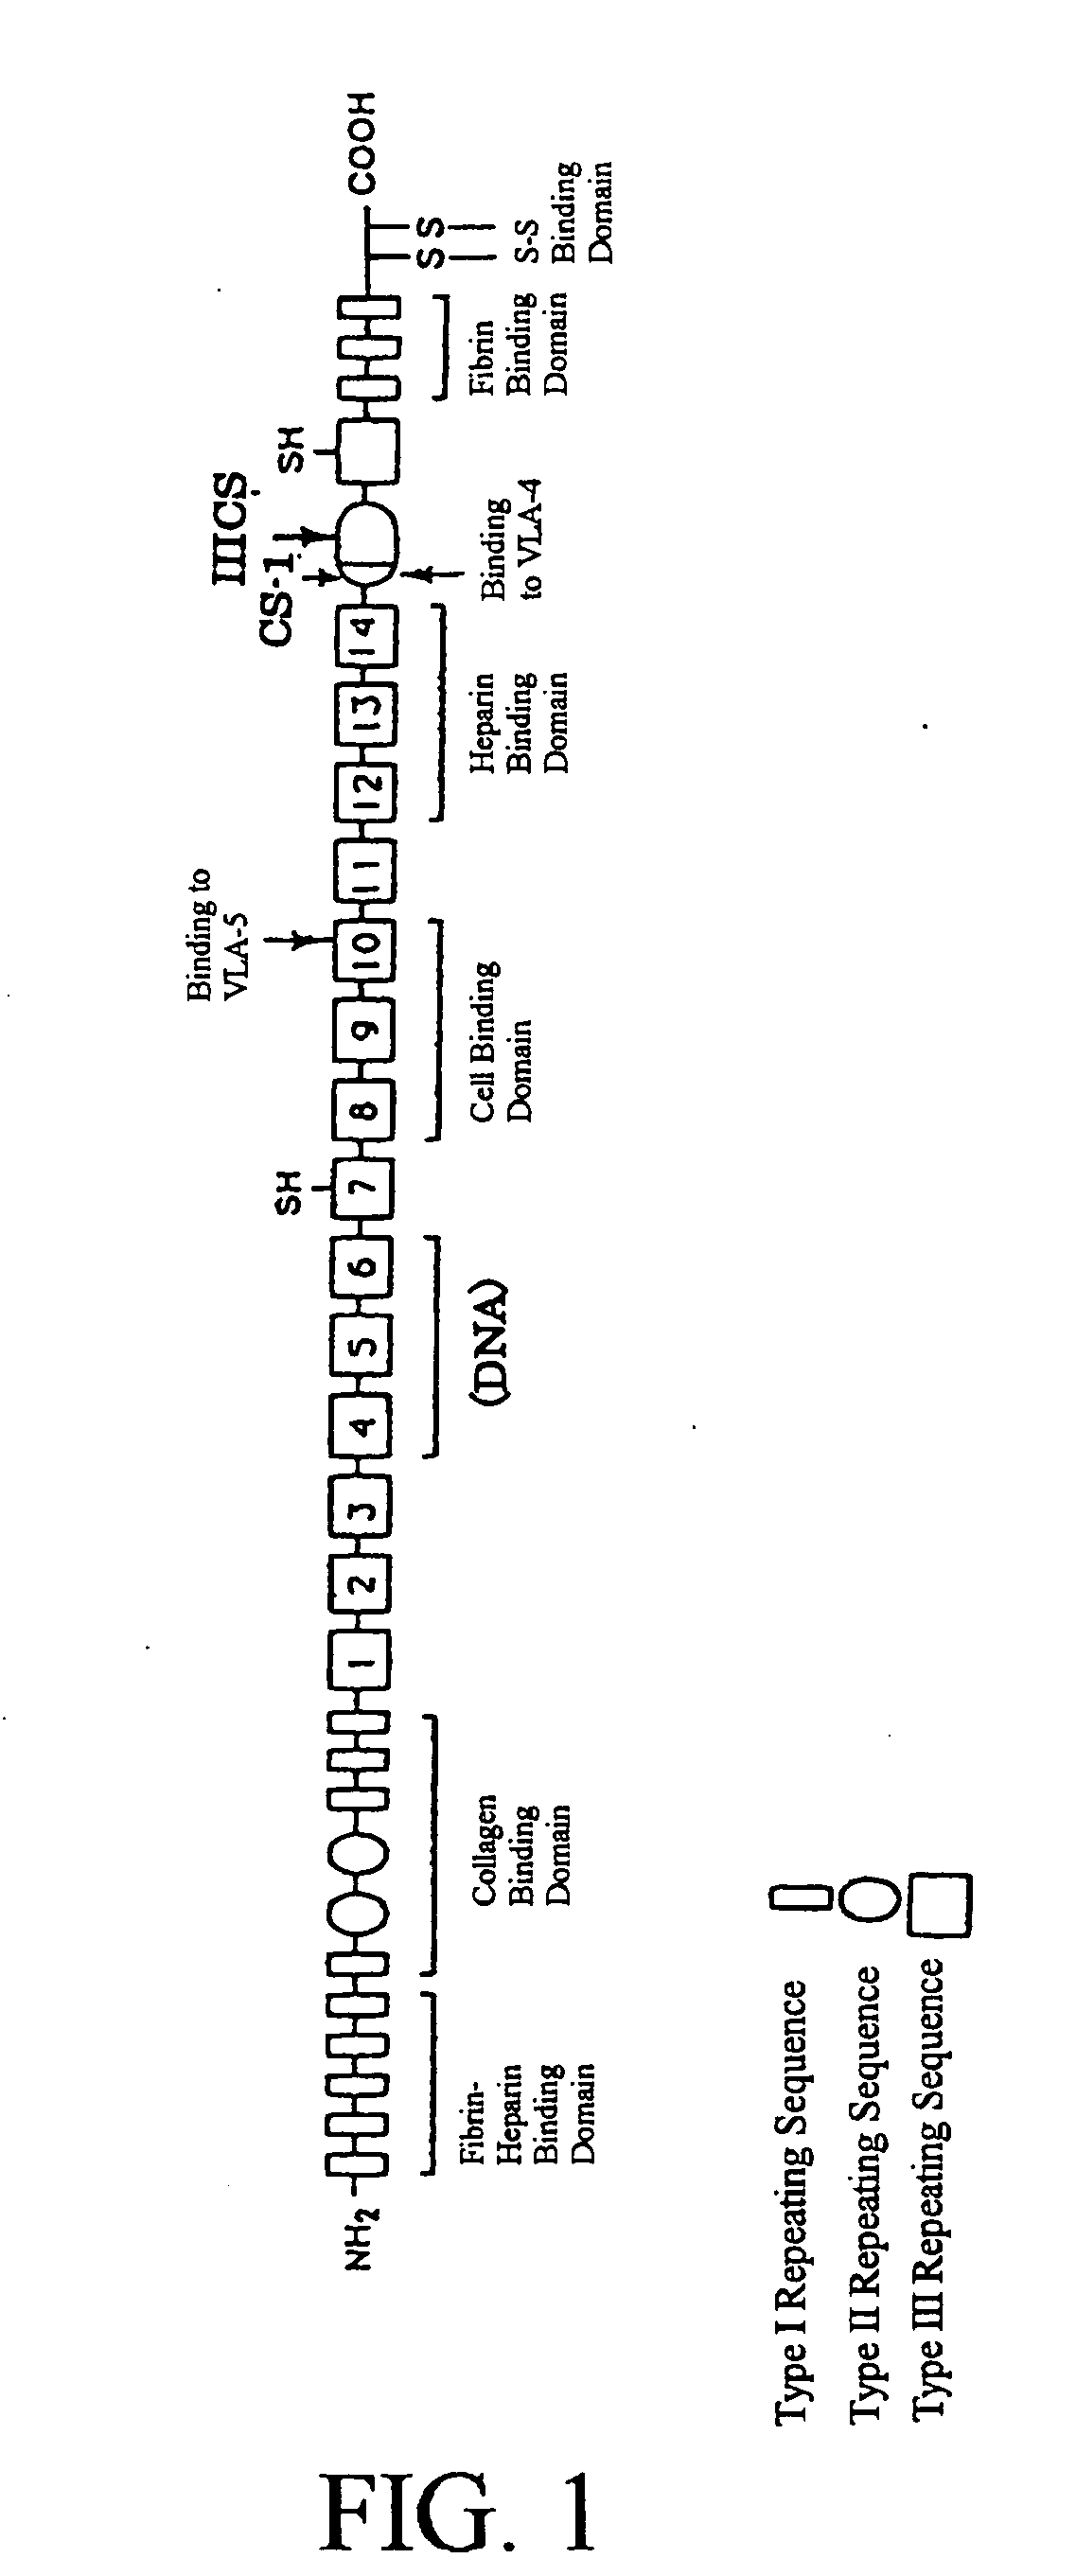 Process for producing cytotoxic lymphocyte